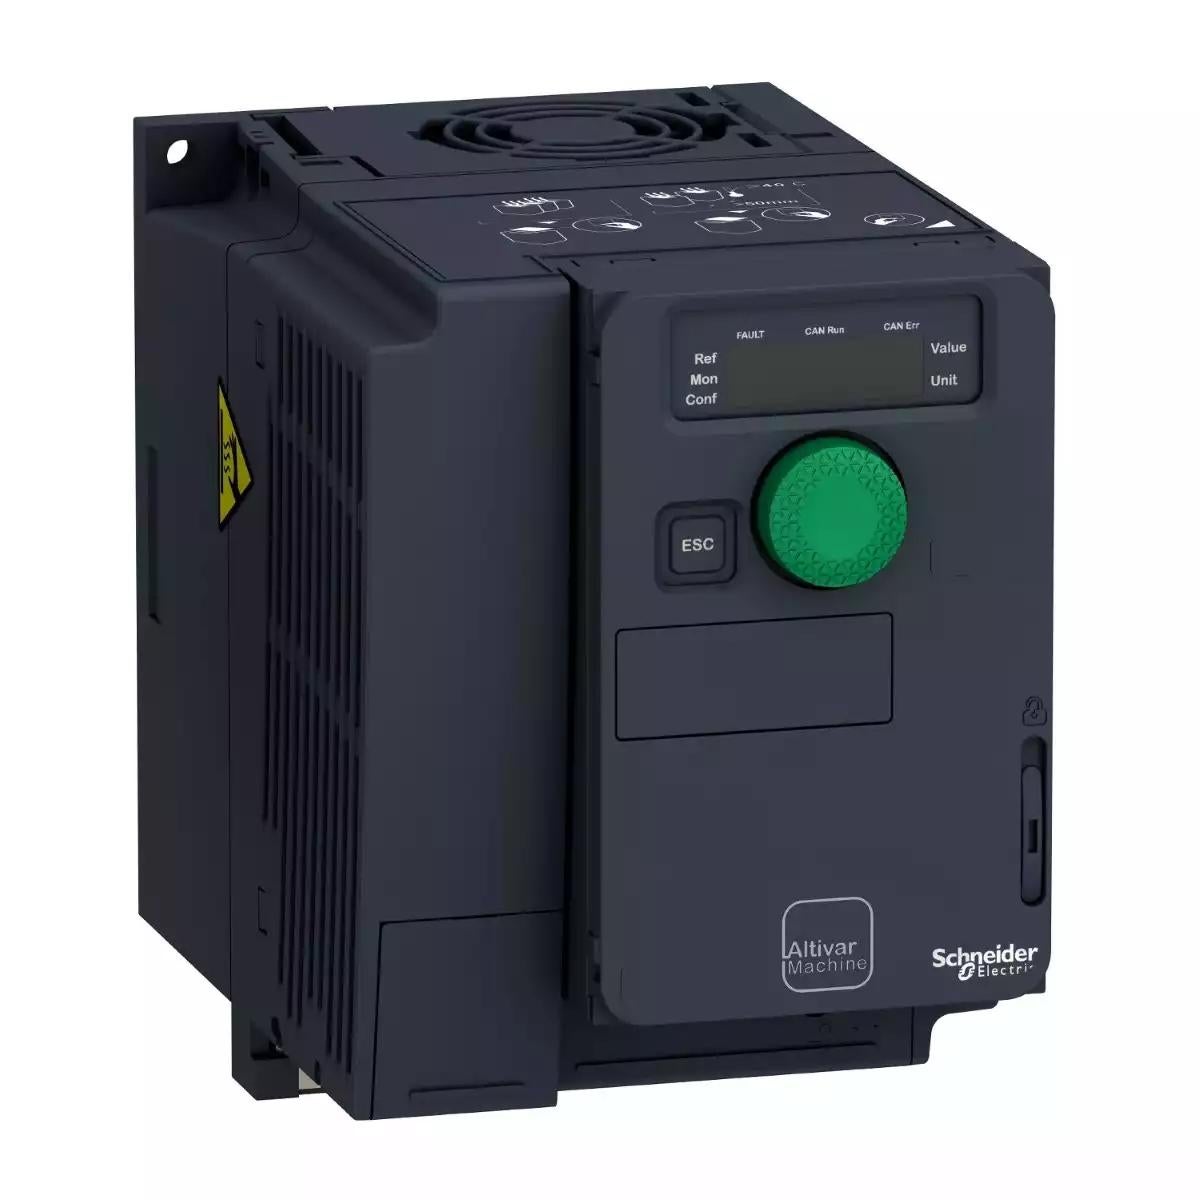 Schneider Electric Altivar 320 variable speed drive, ATV320, 1.5 kW, 380â€¦500 V, 3 phases, compact